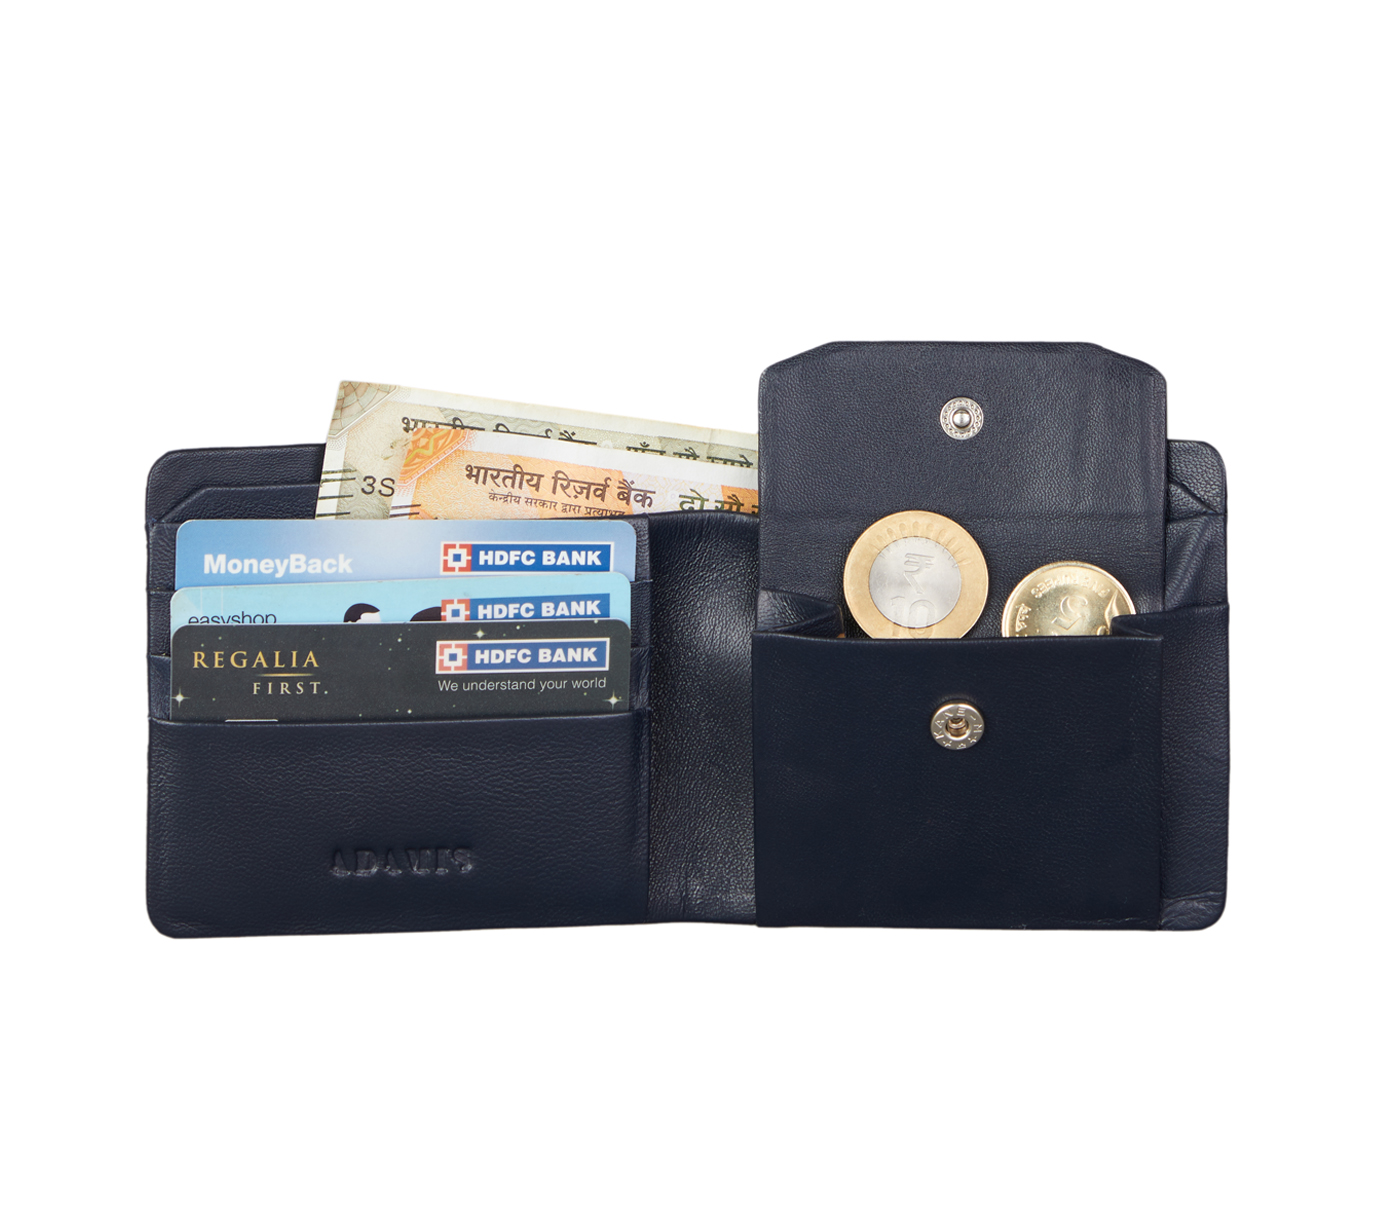 VW1-Ashton-Men's bifold wallet with coin pocket in Genuine Leather - Blue